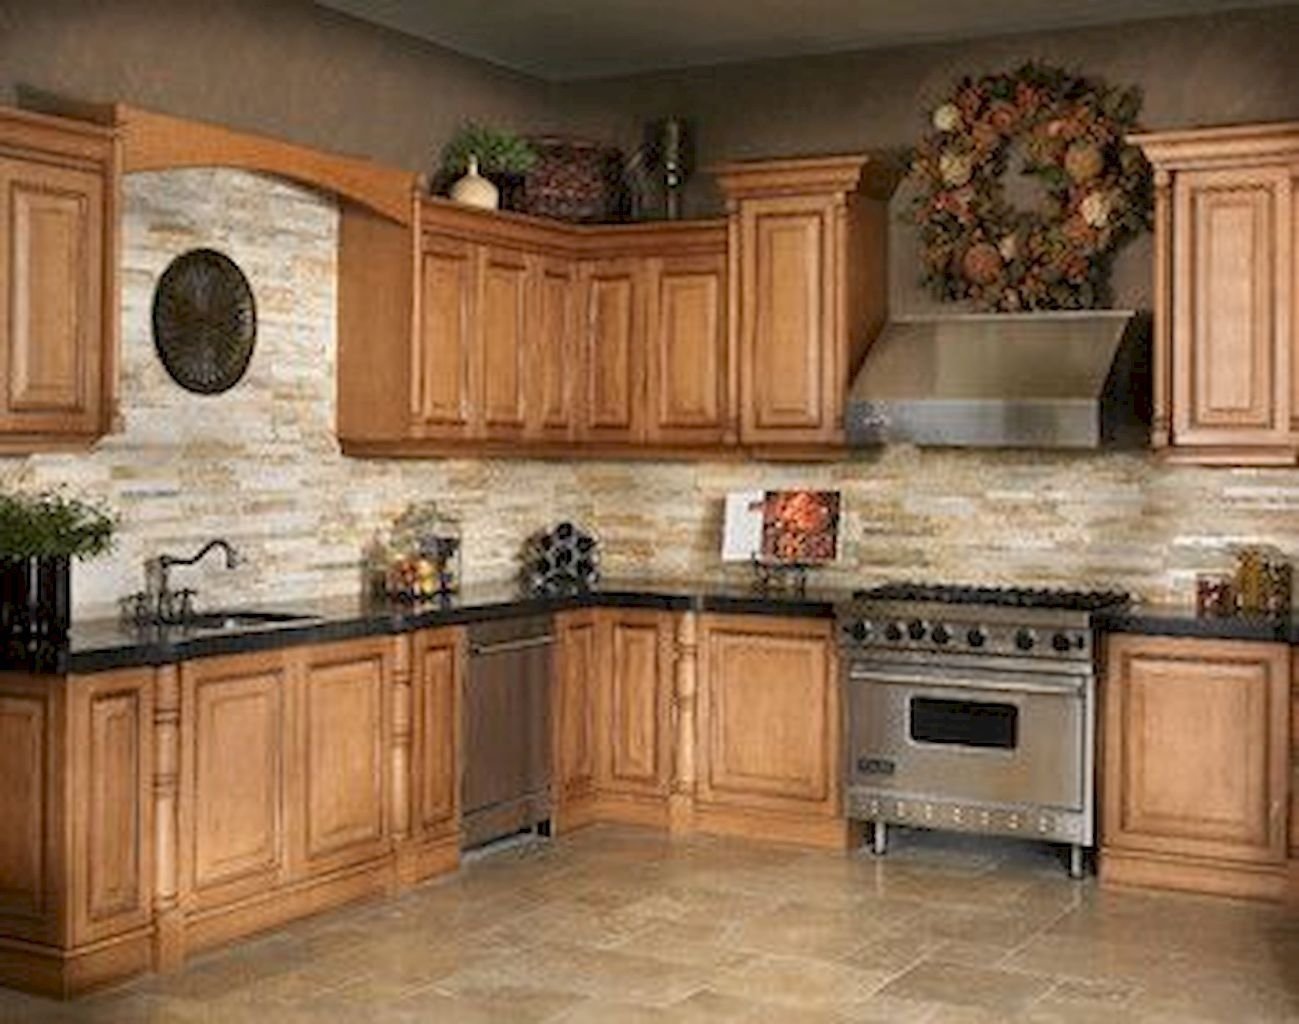 Warm Kitchen Colors With White Cabinets Honey Oak Kitchen Cabinets 